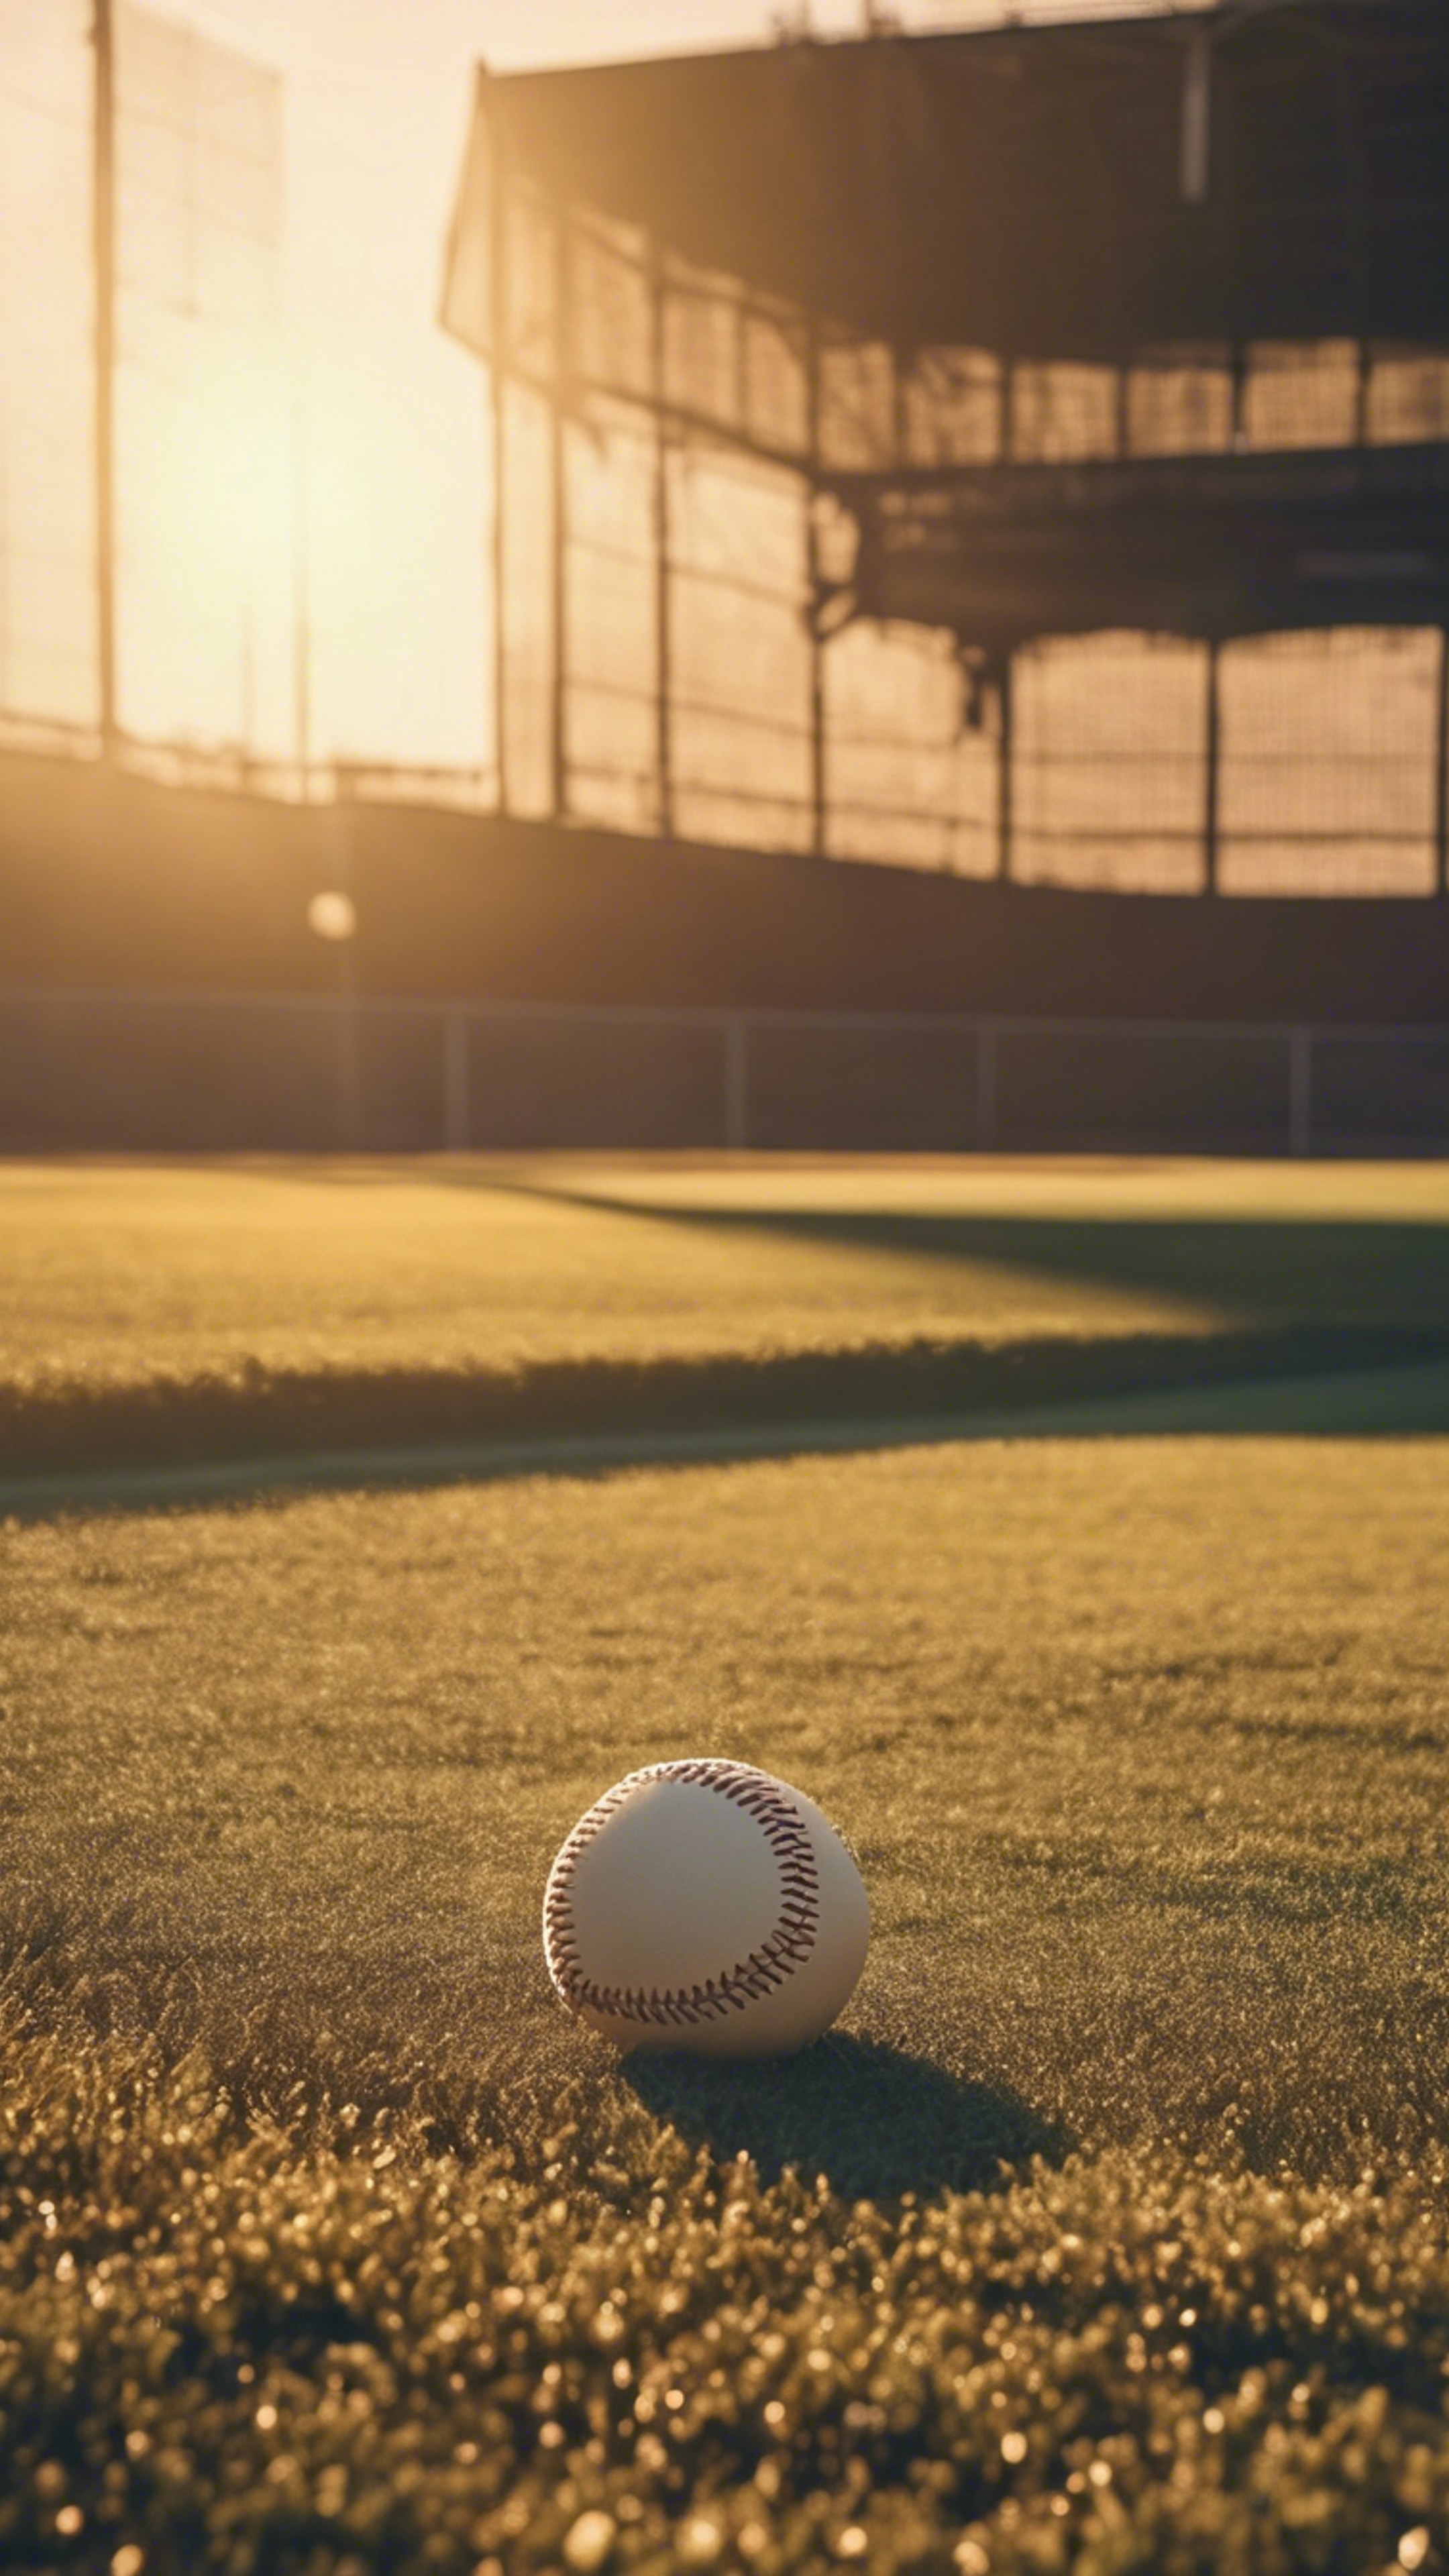 A well manicured baseball field, bathed in the golden rays of a setting sun. Валлпапер[a377ce6b387a4eee98b8]